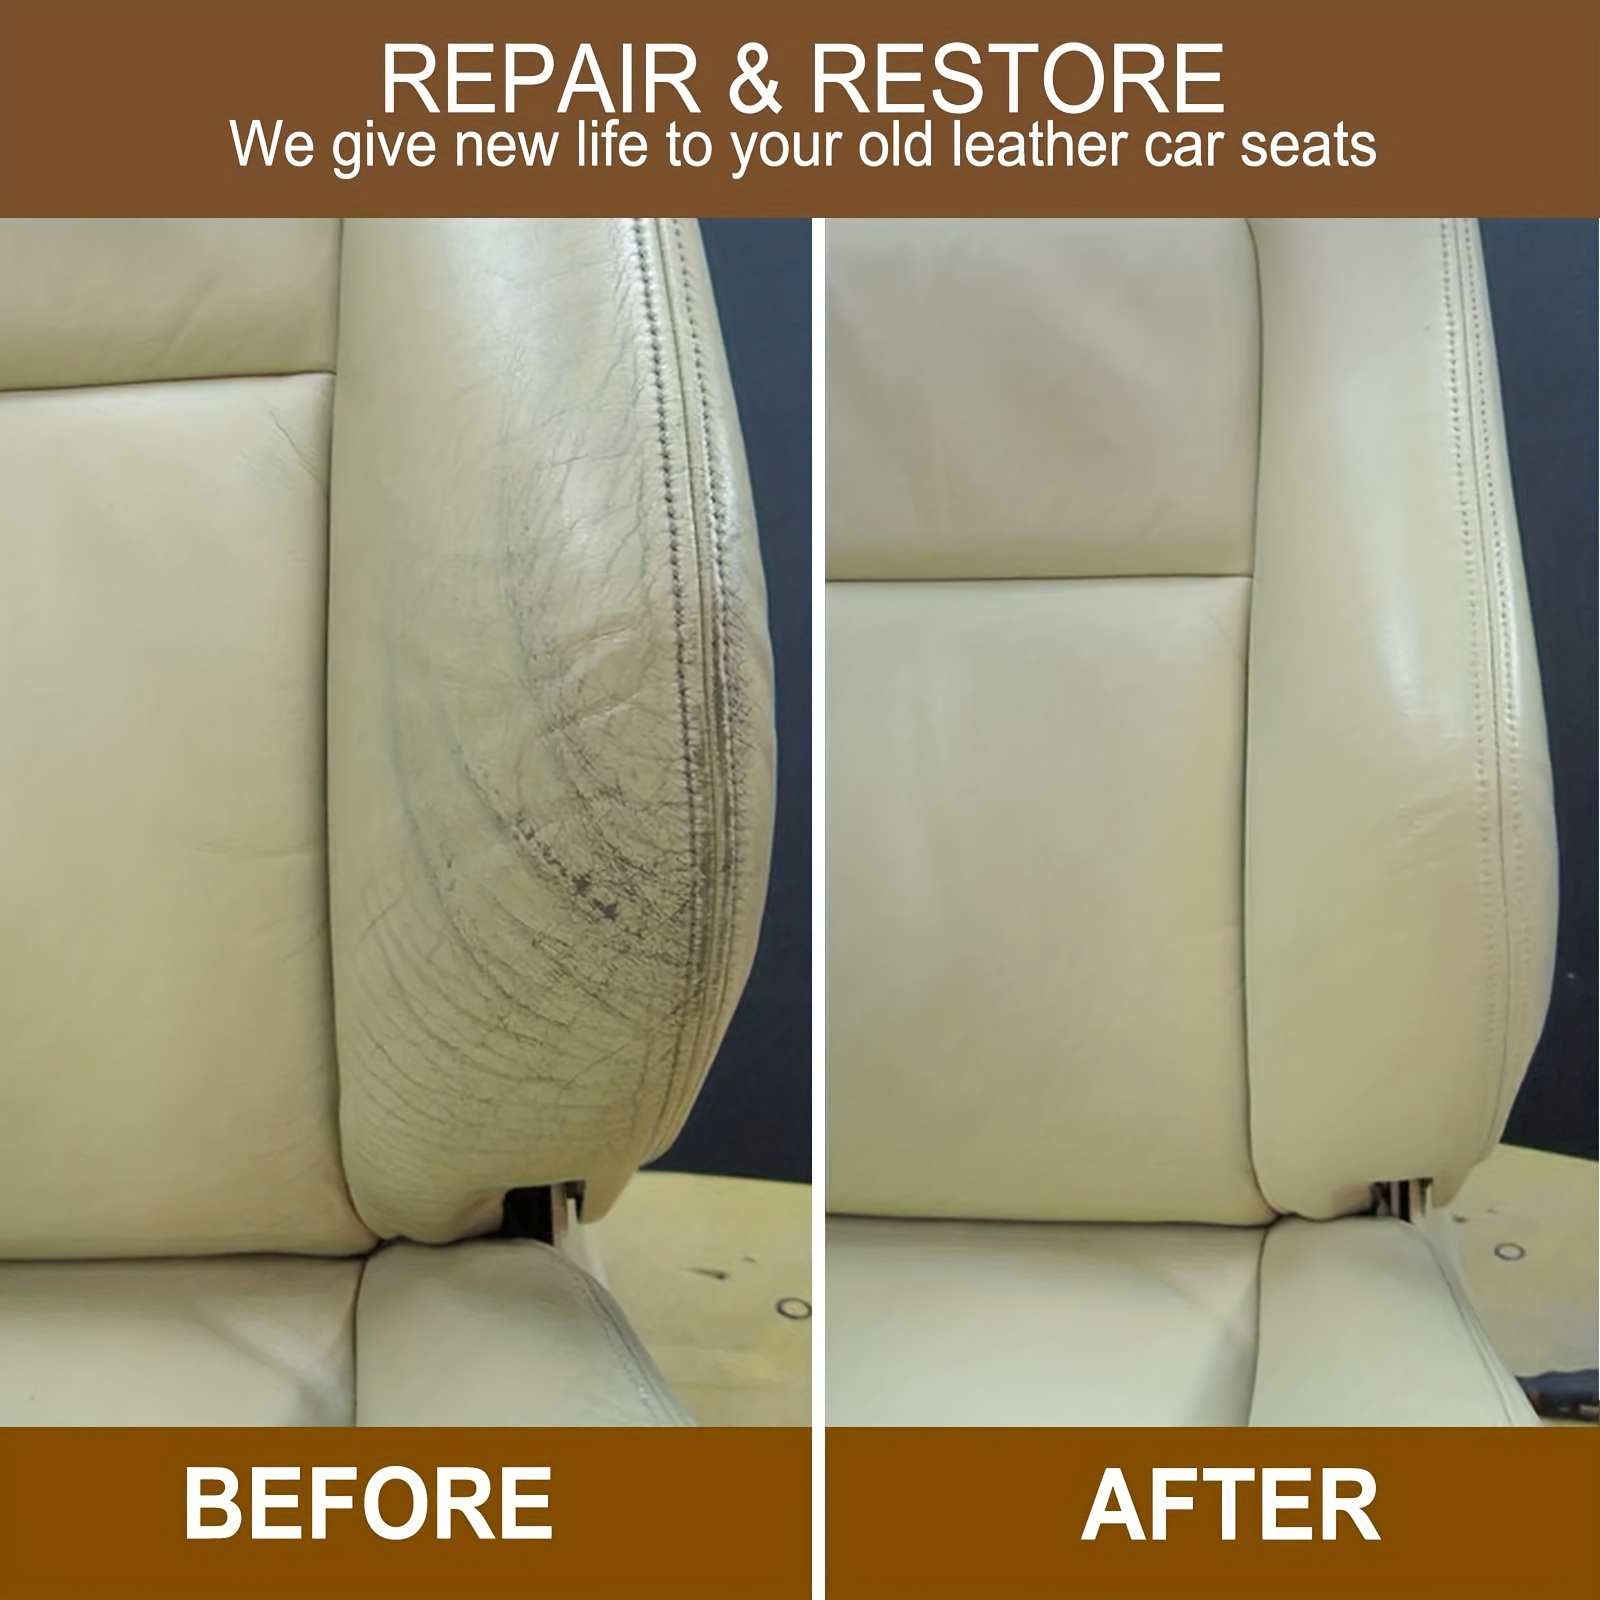 Leather Scratch Remover 